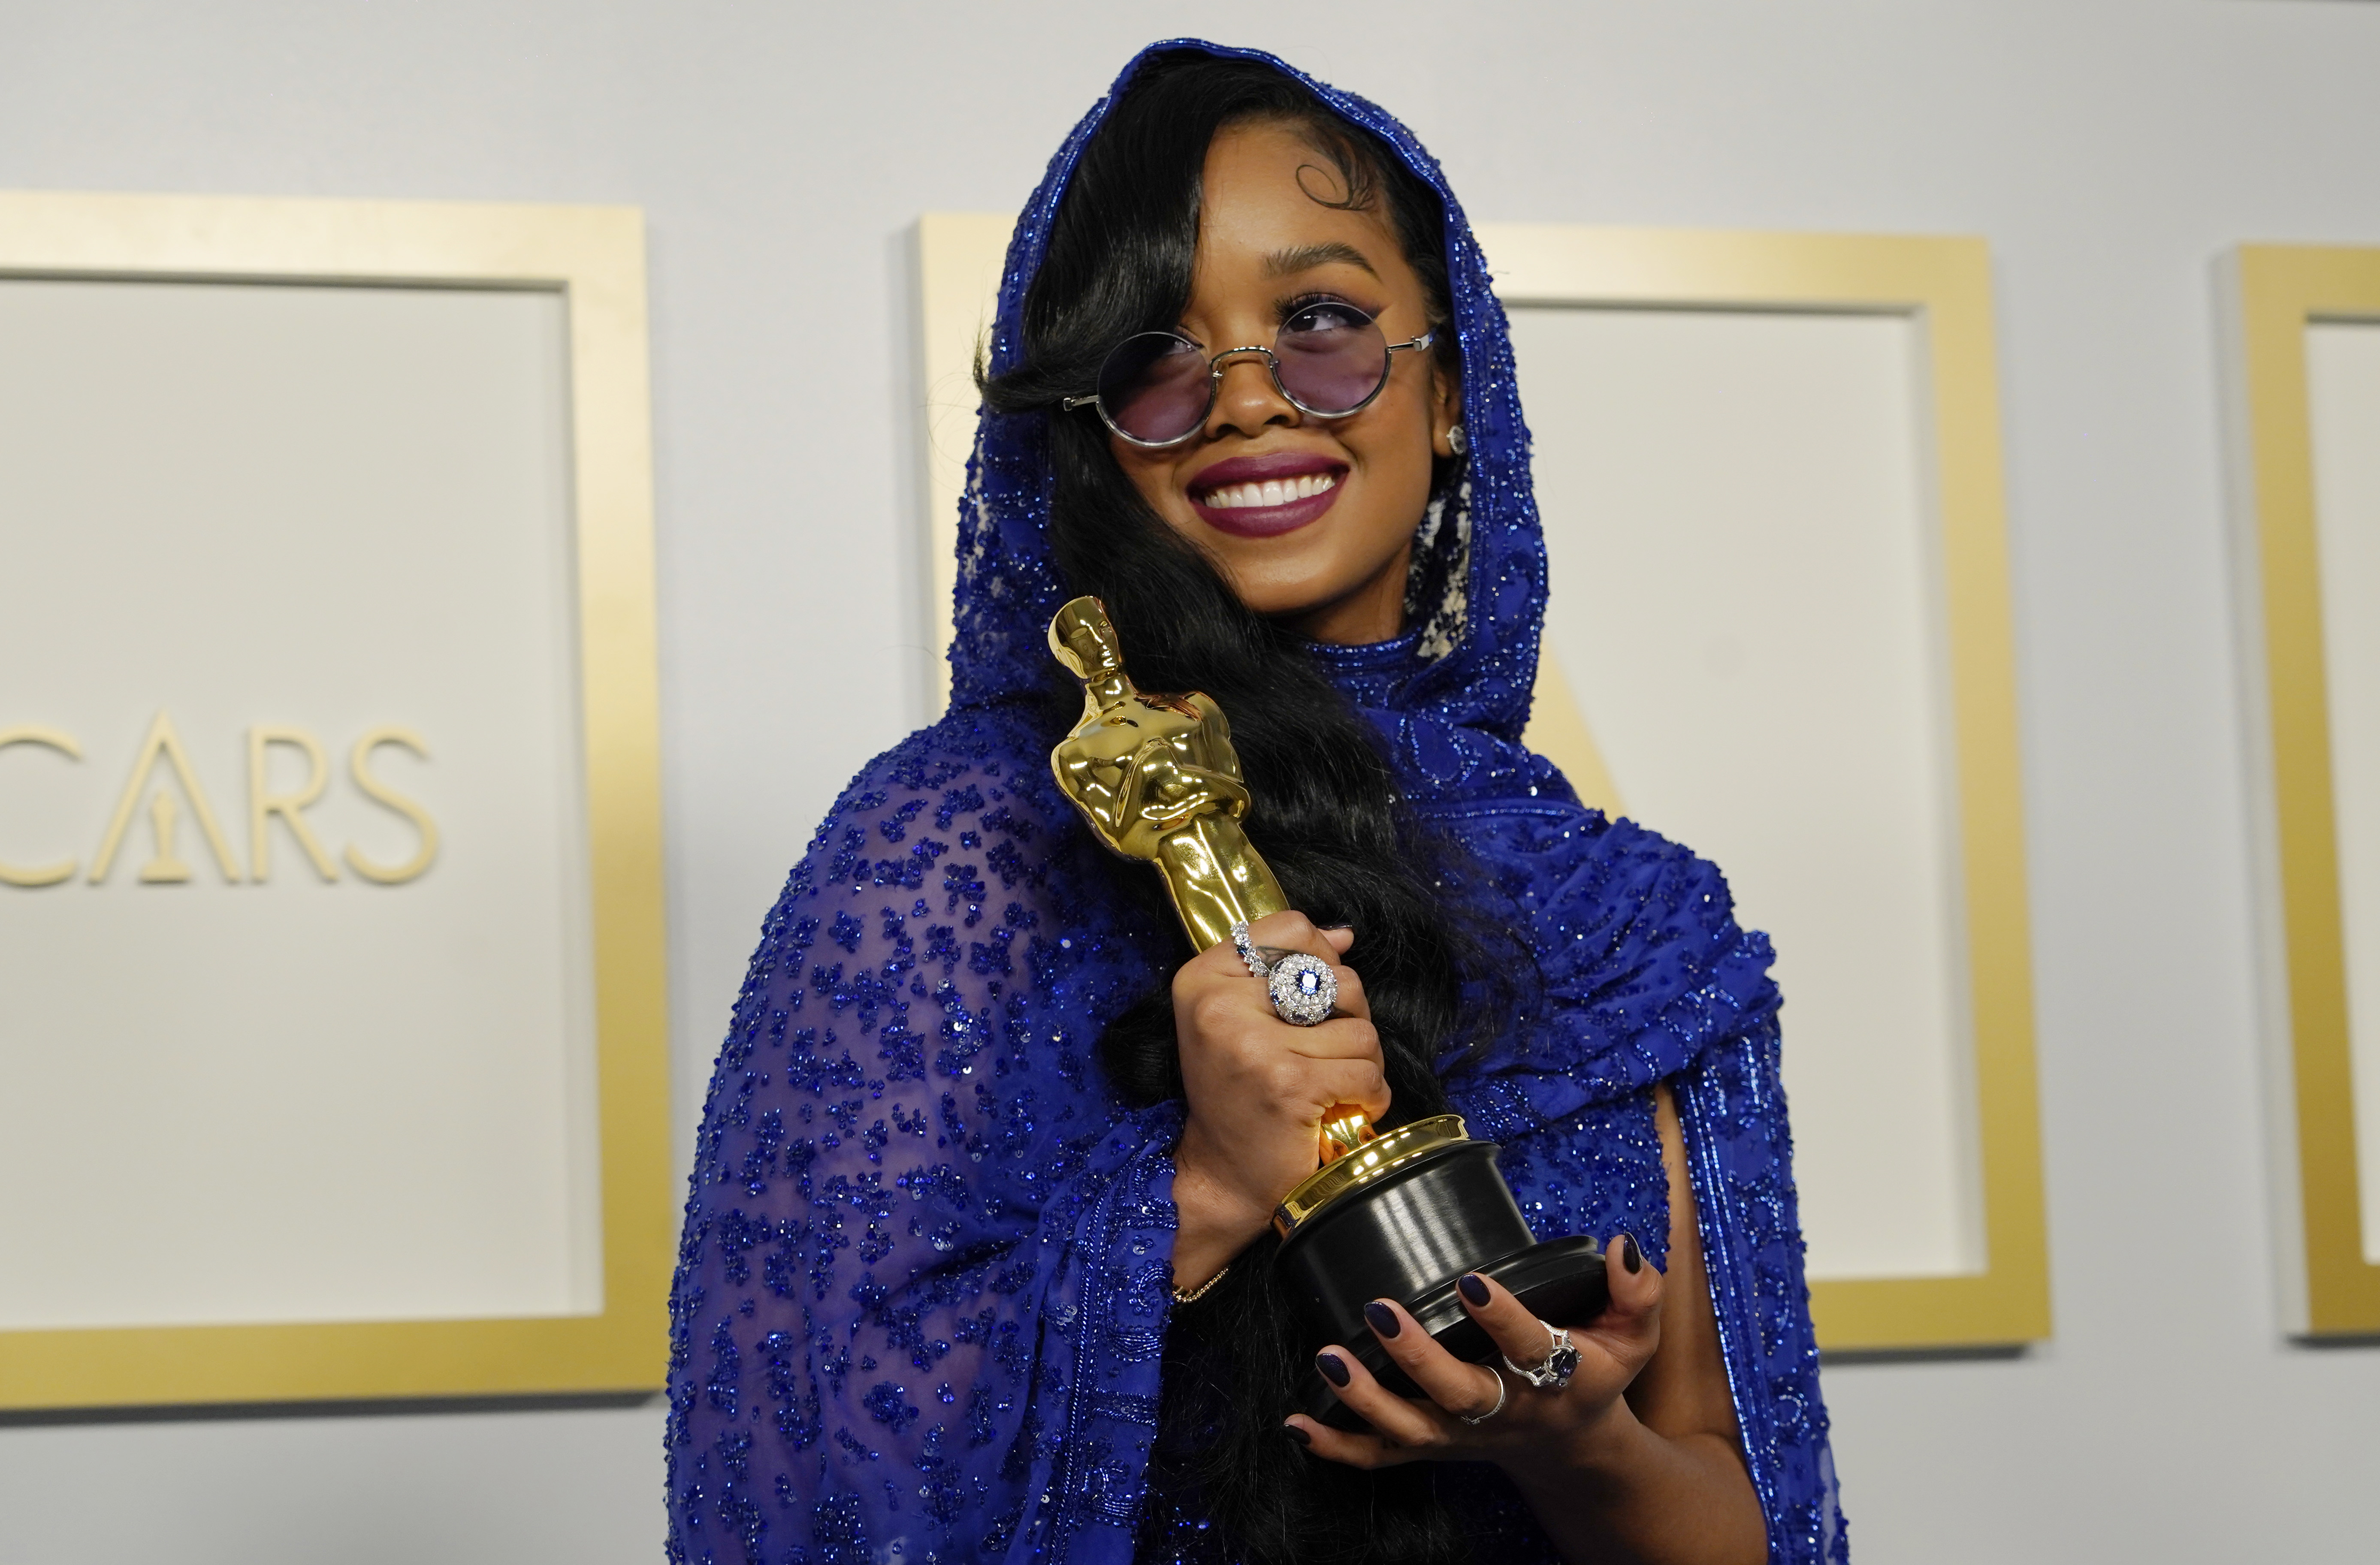 R&B singer H.E.R. to play Belle in ABC's upcoming special Beauty